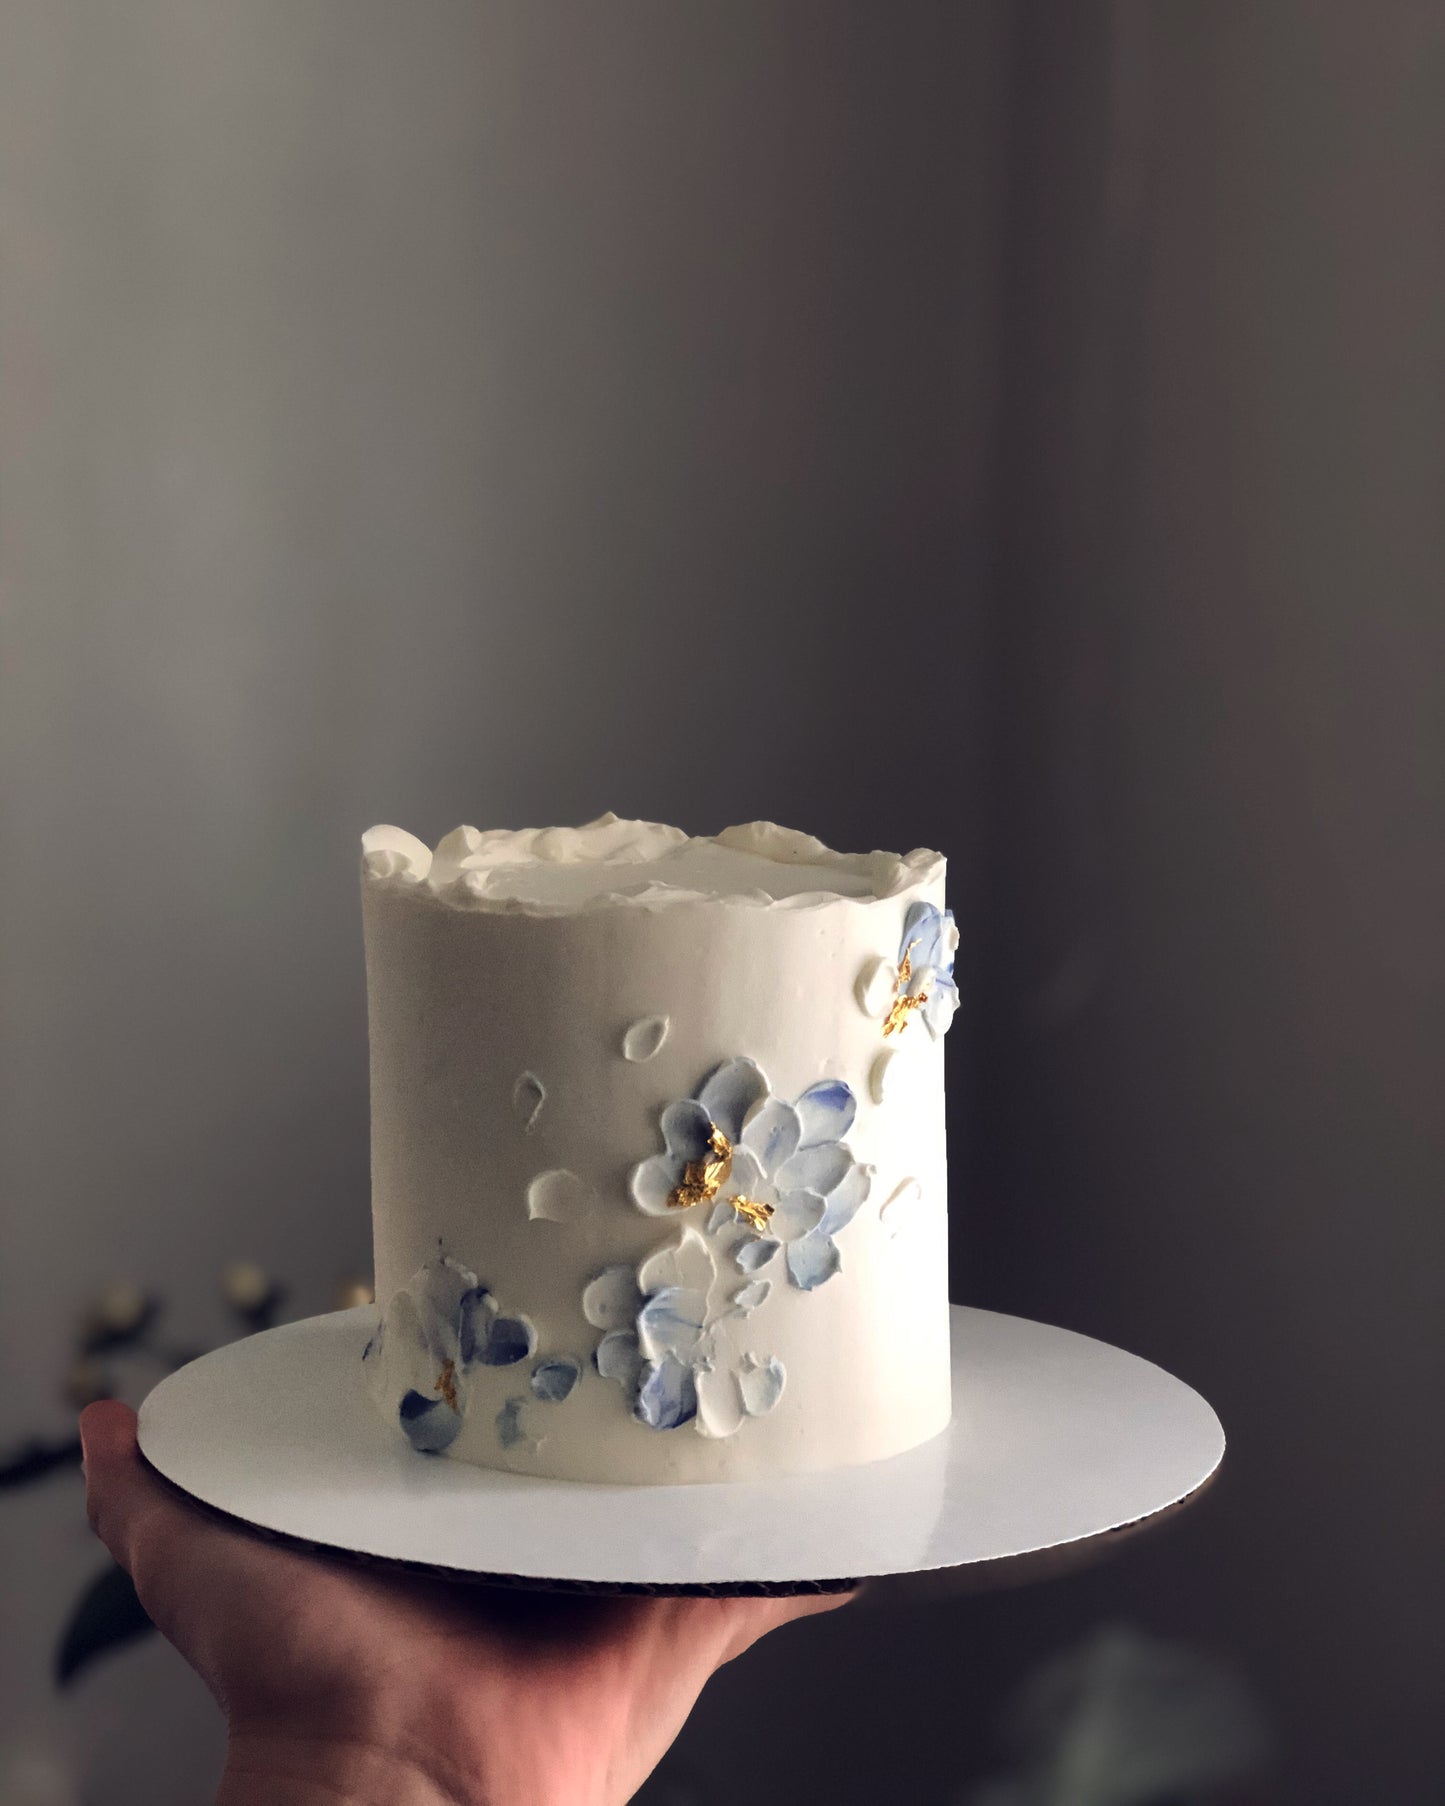 Event: Painted Cake Class with Becca + Alia!